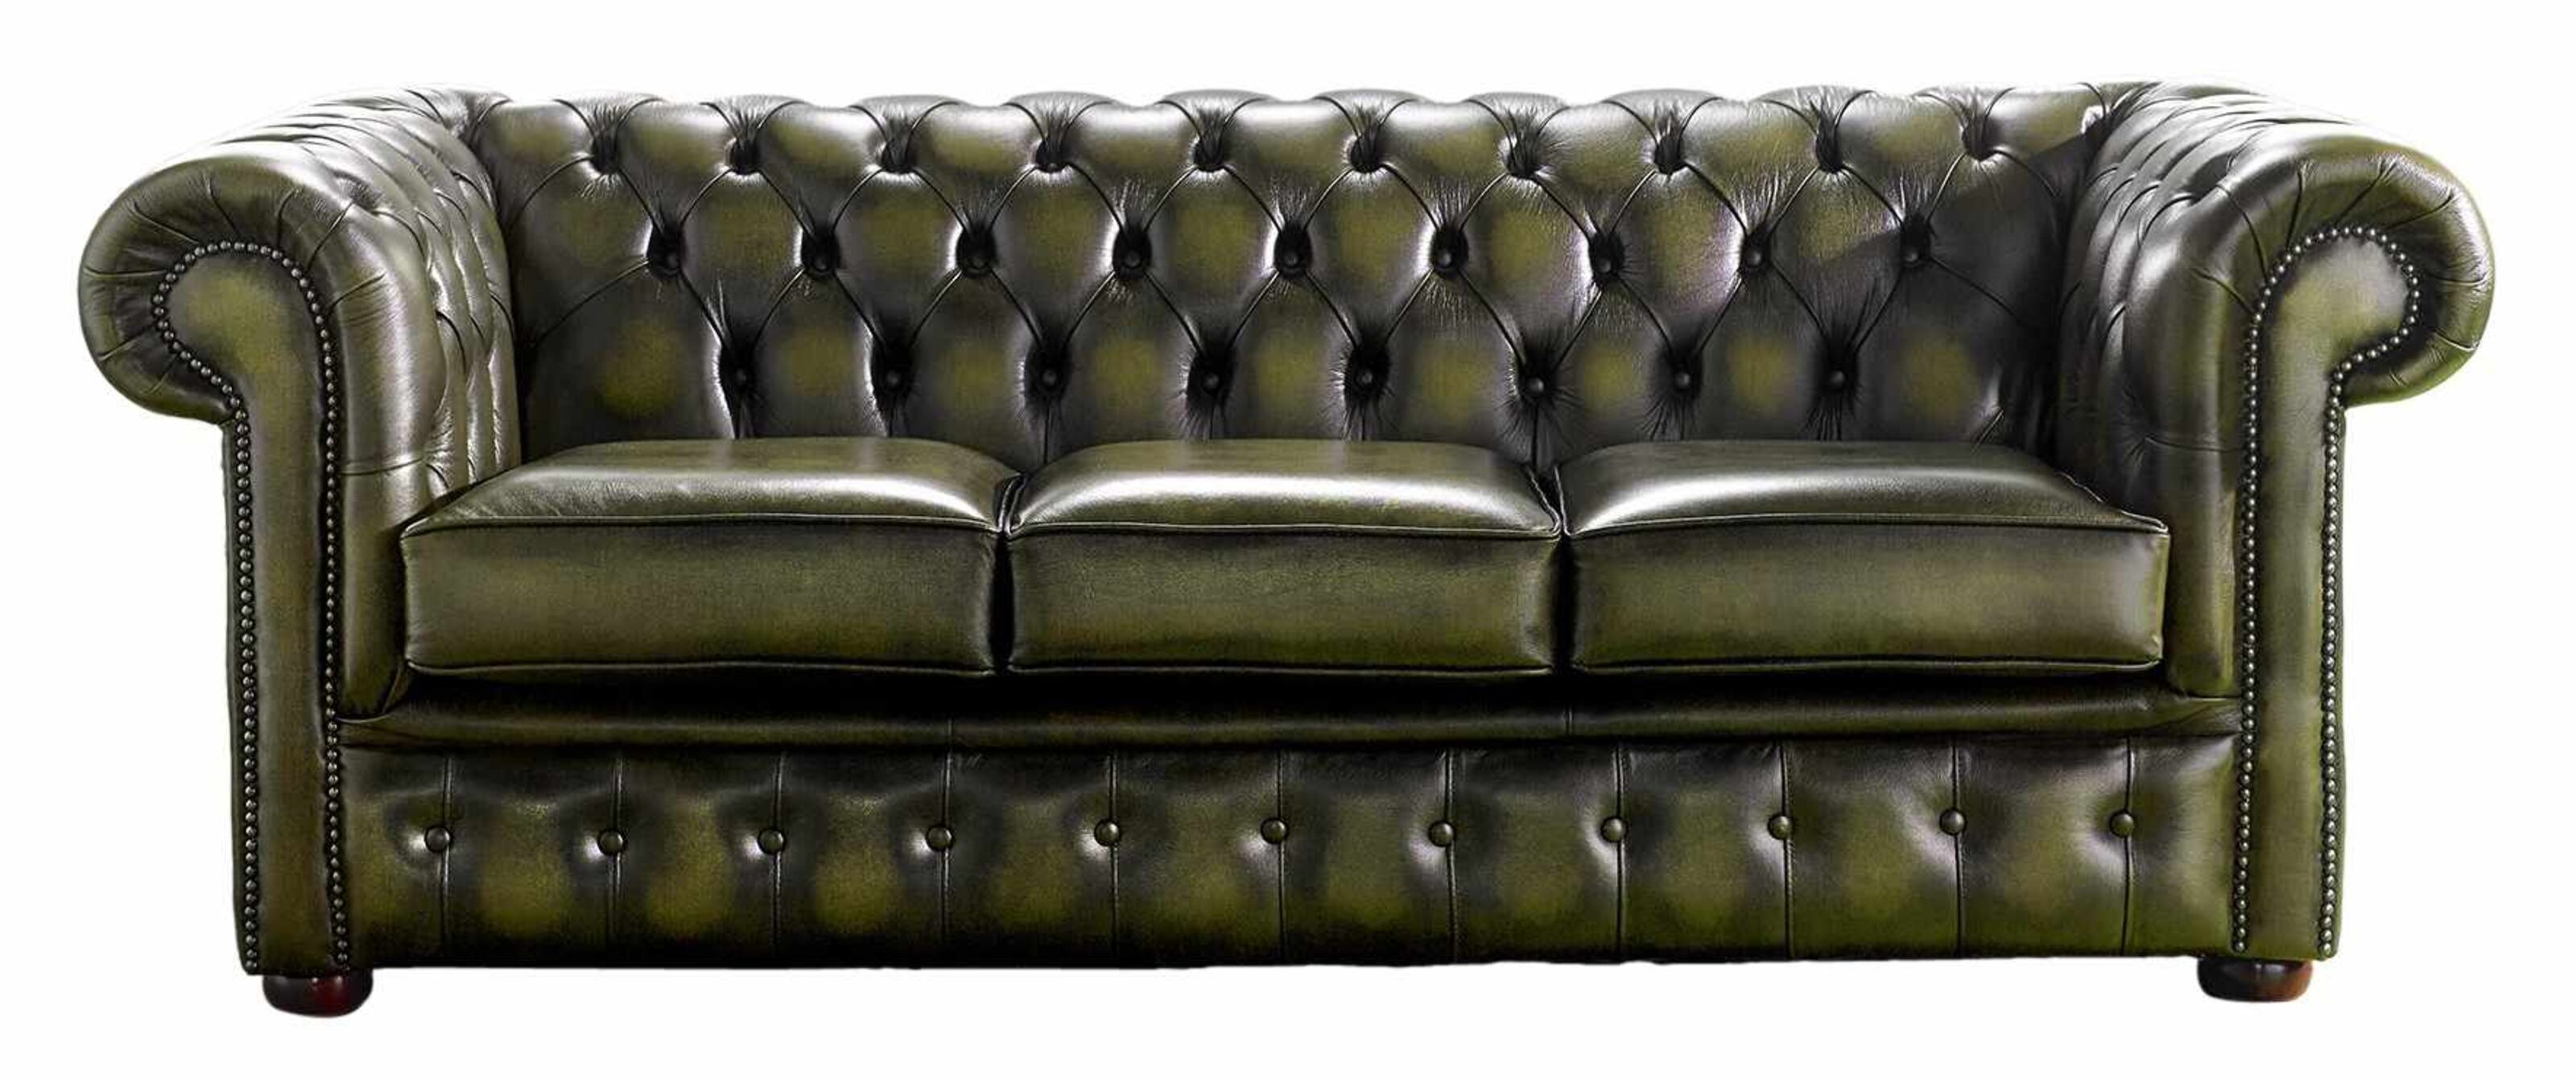 Contemporary Charm Integrating a Chesterfield Sofa into a Modern Living Room Setting  %Post Title